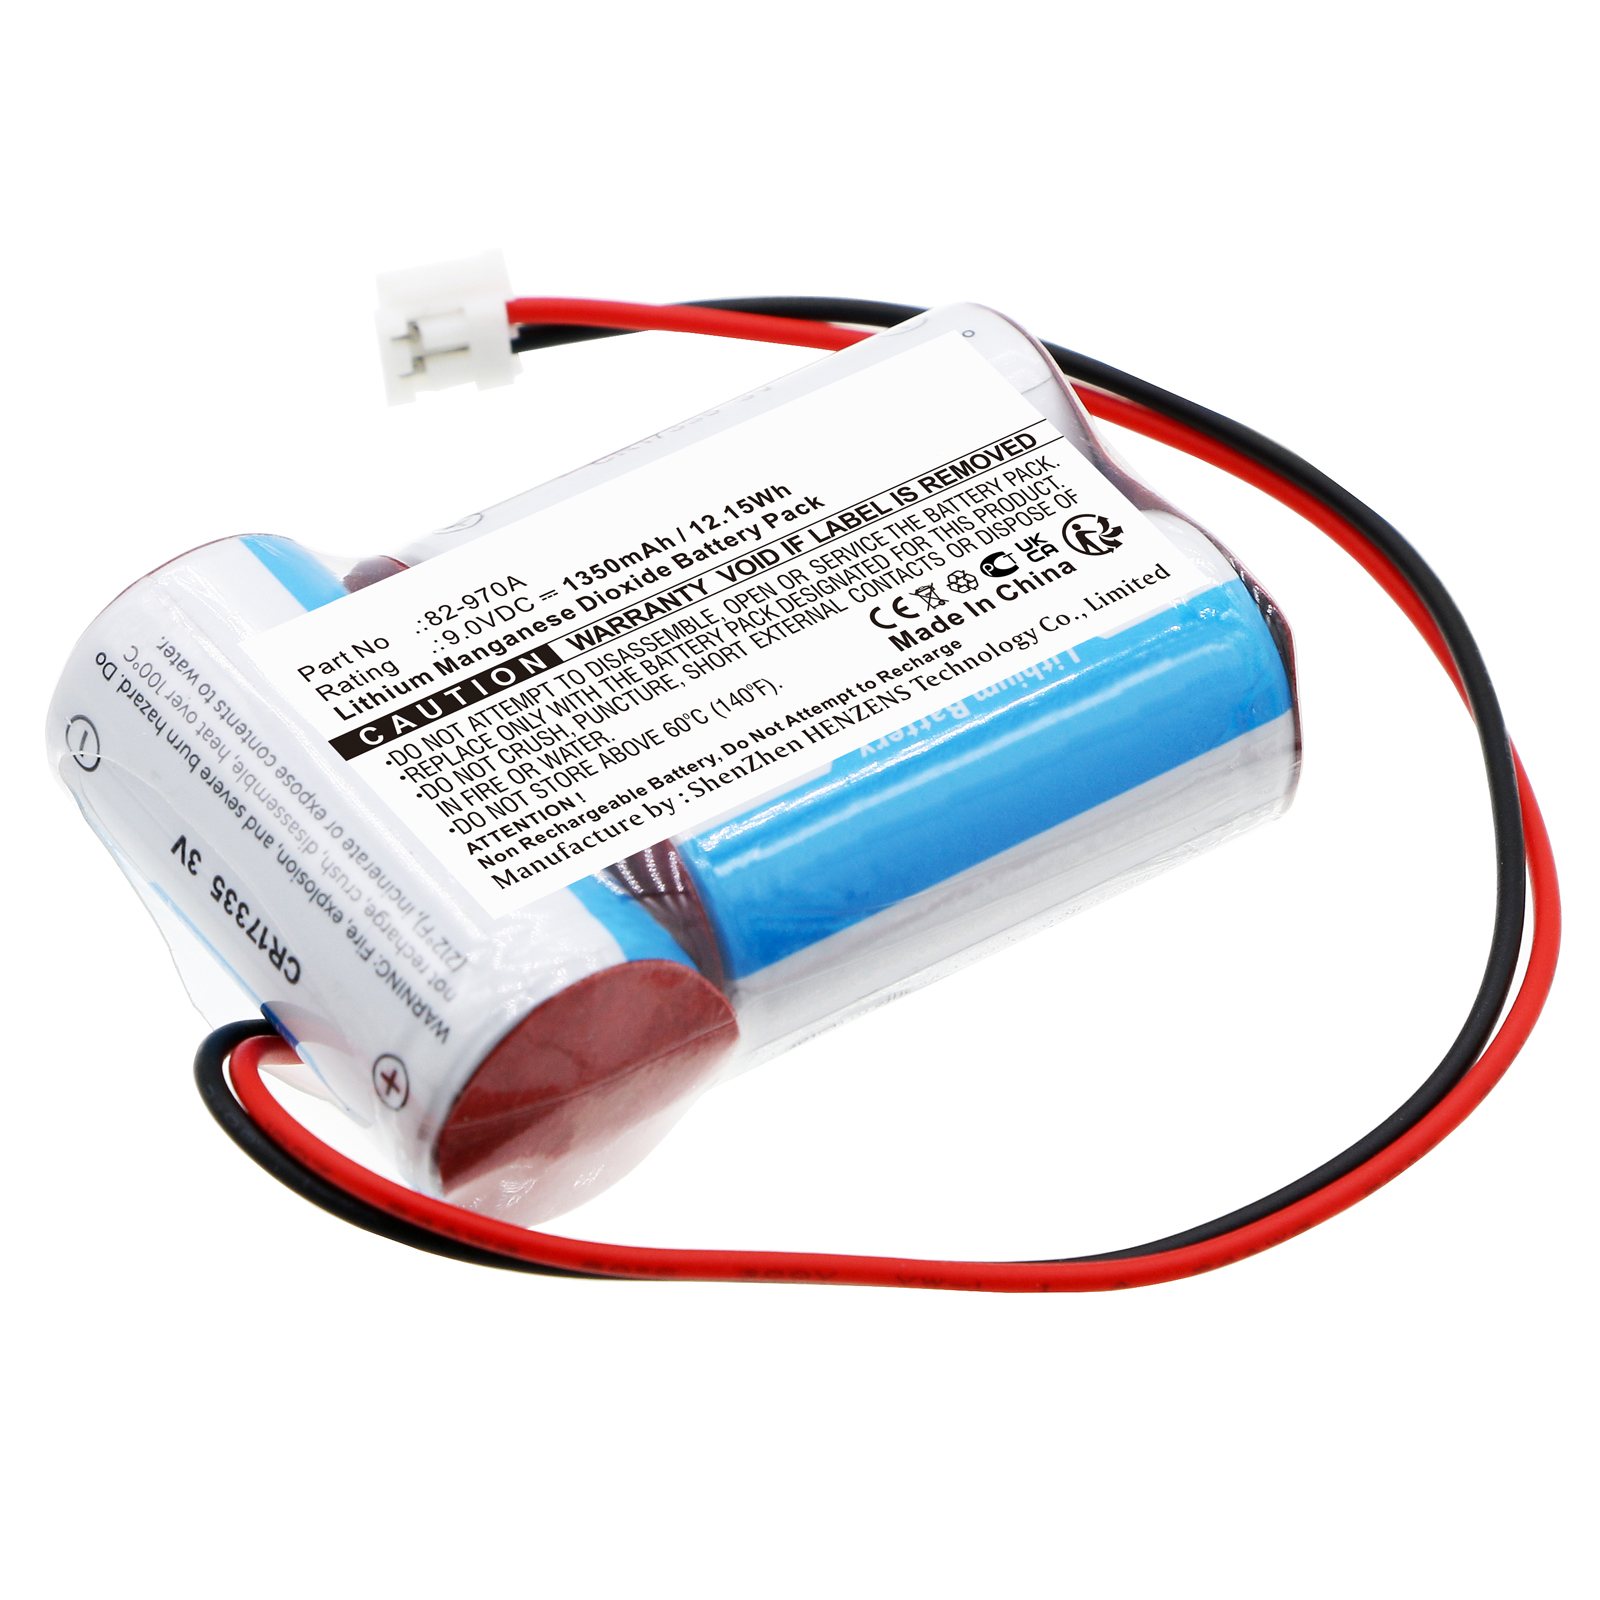 Batteries for SimradMarine Safety & Flotation Devices